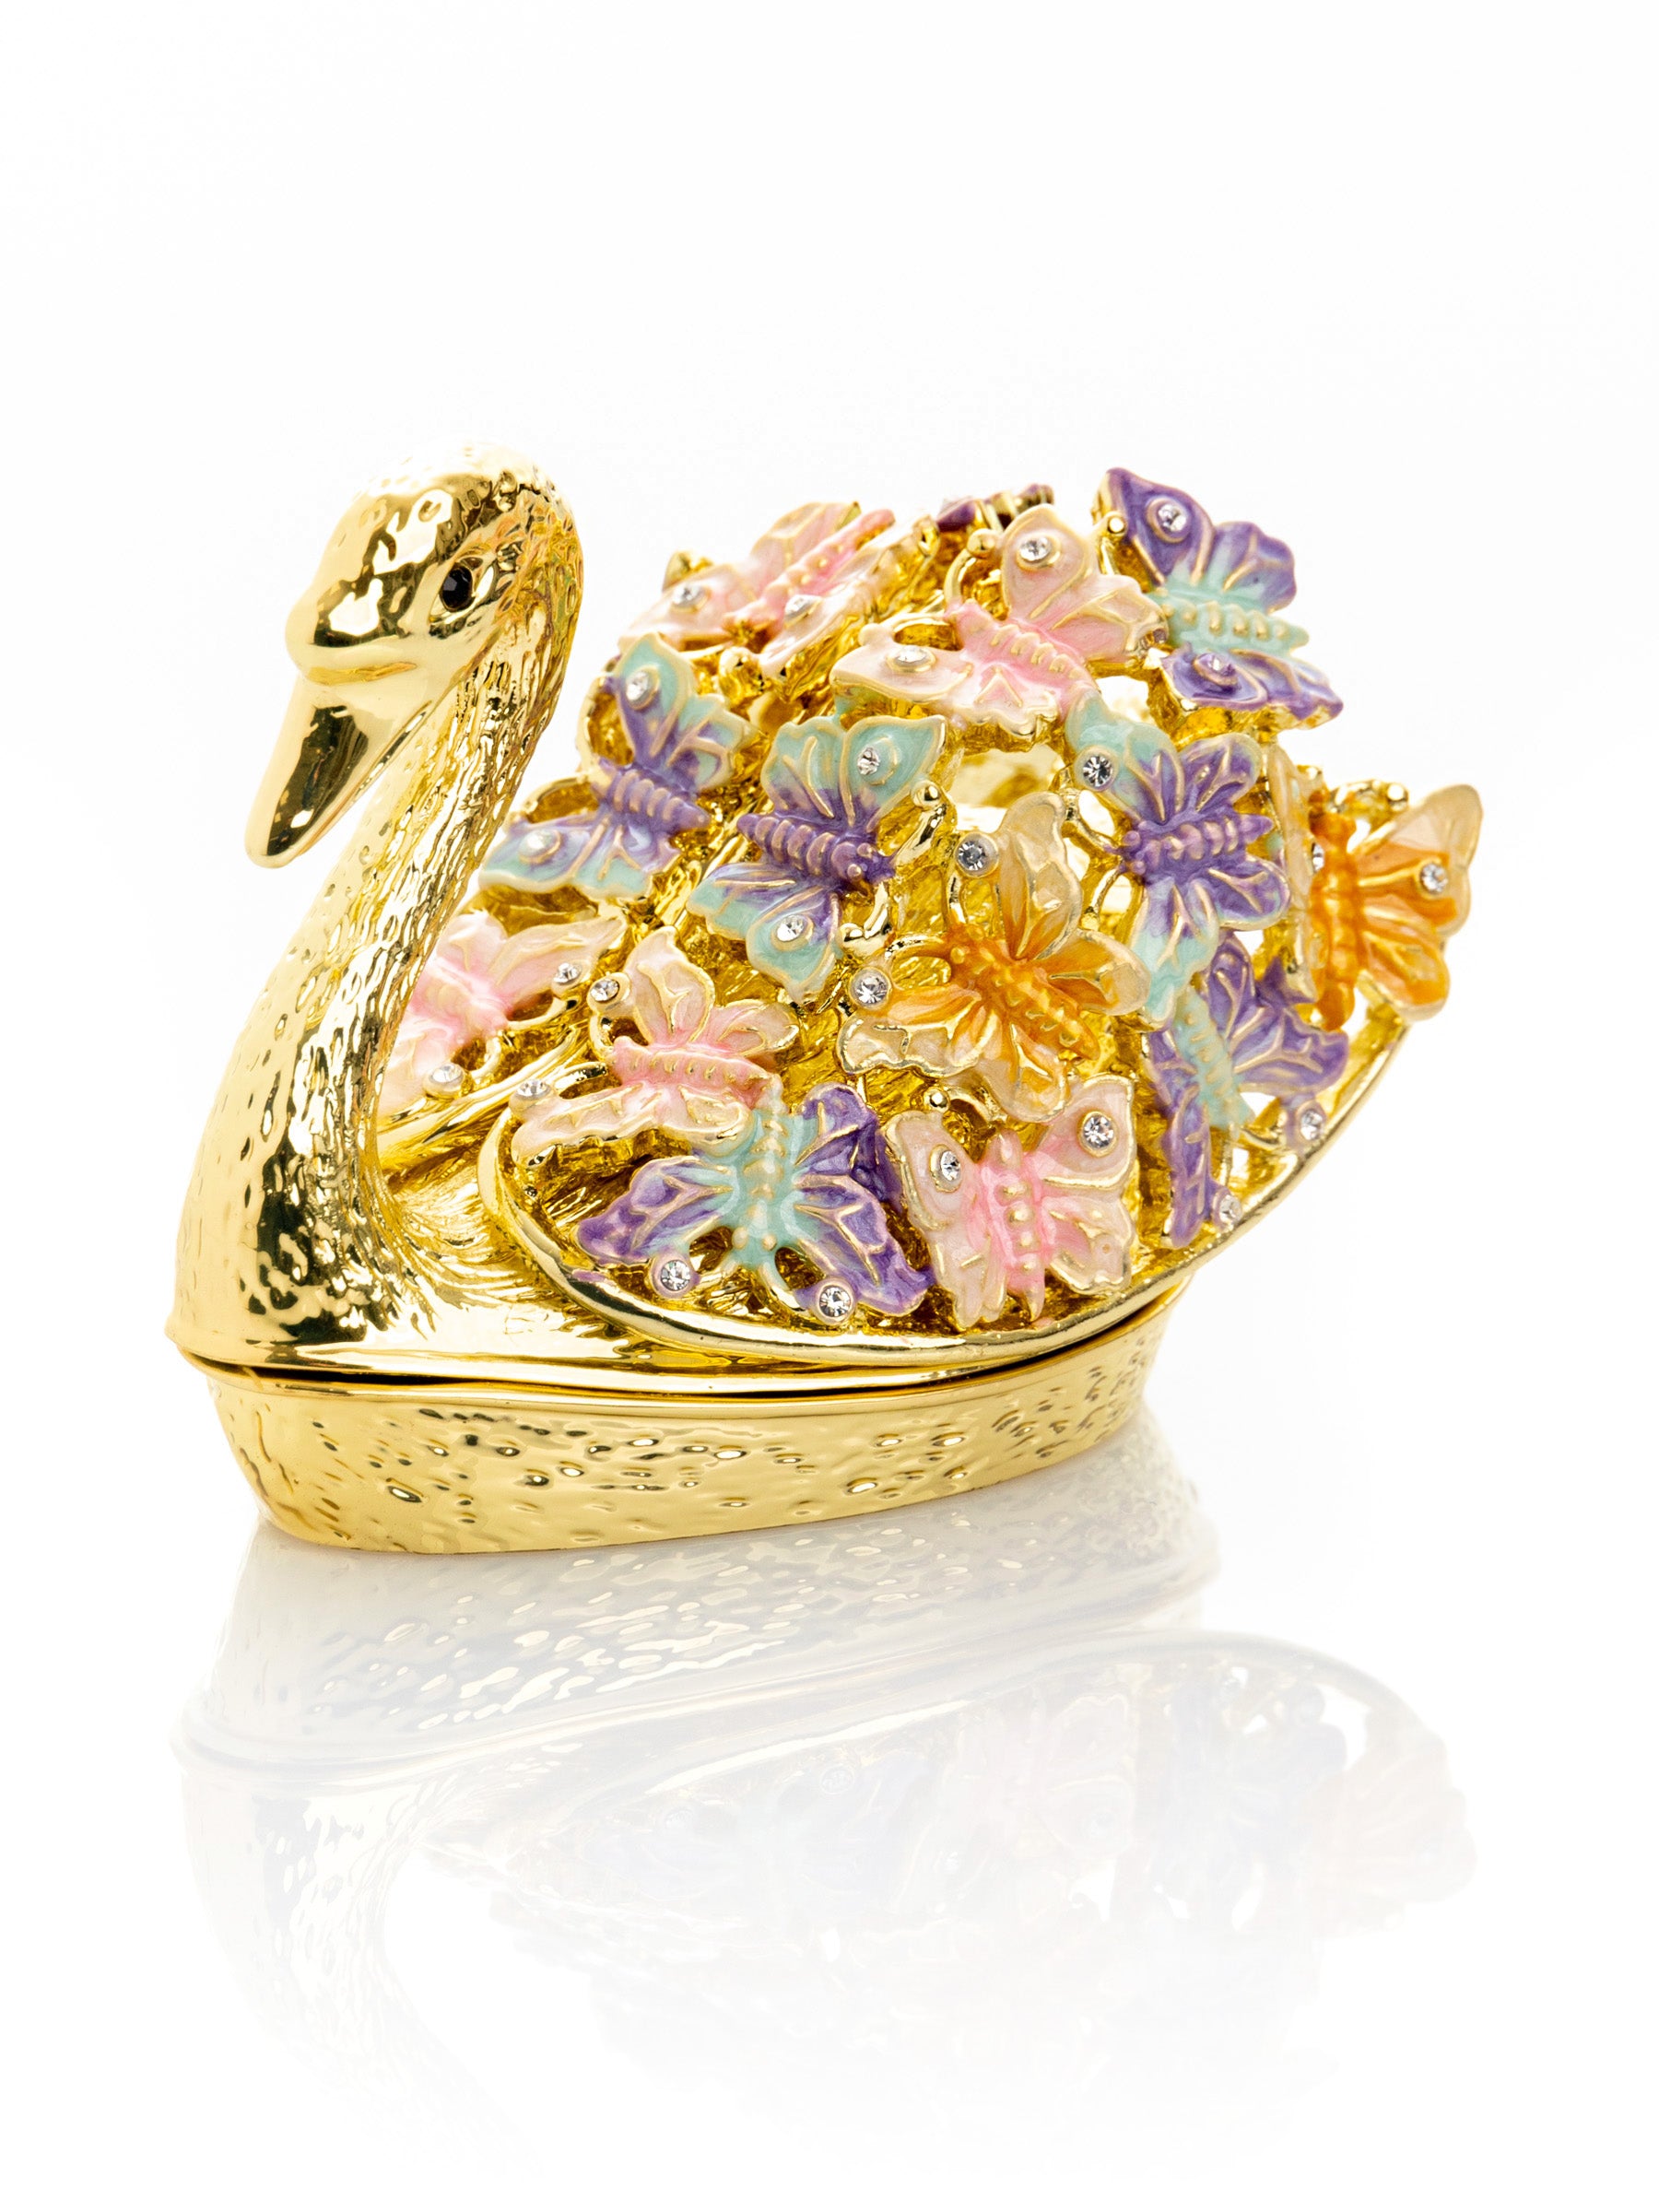 Golden Swan Decorated with Butterflies